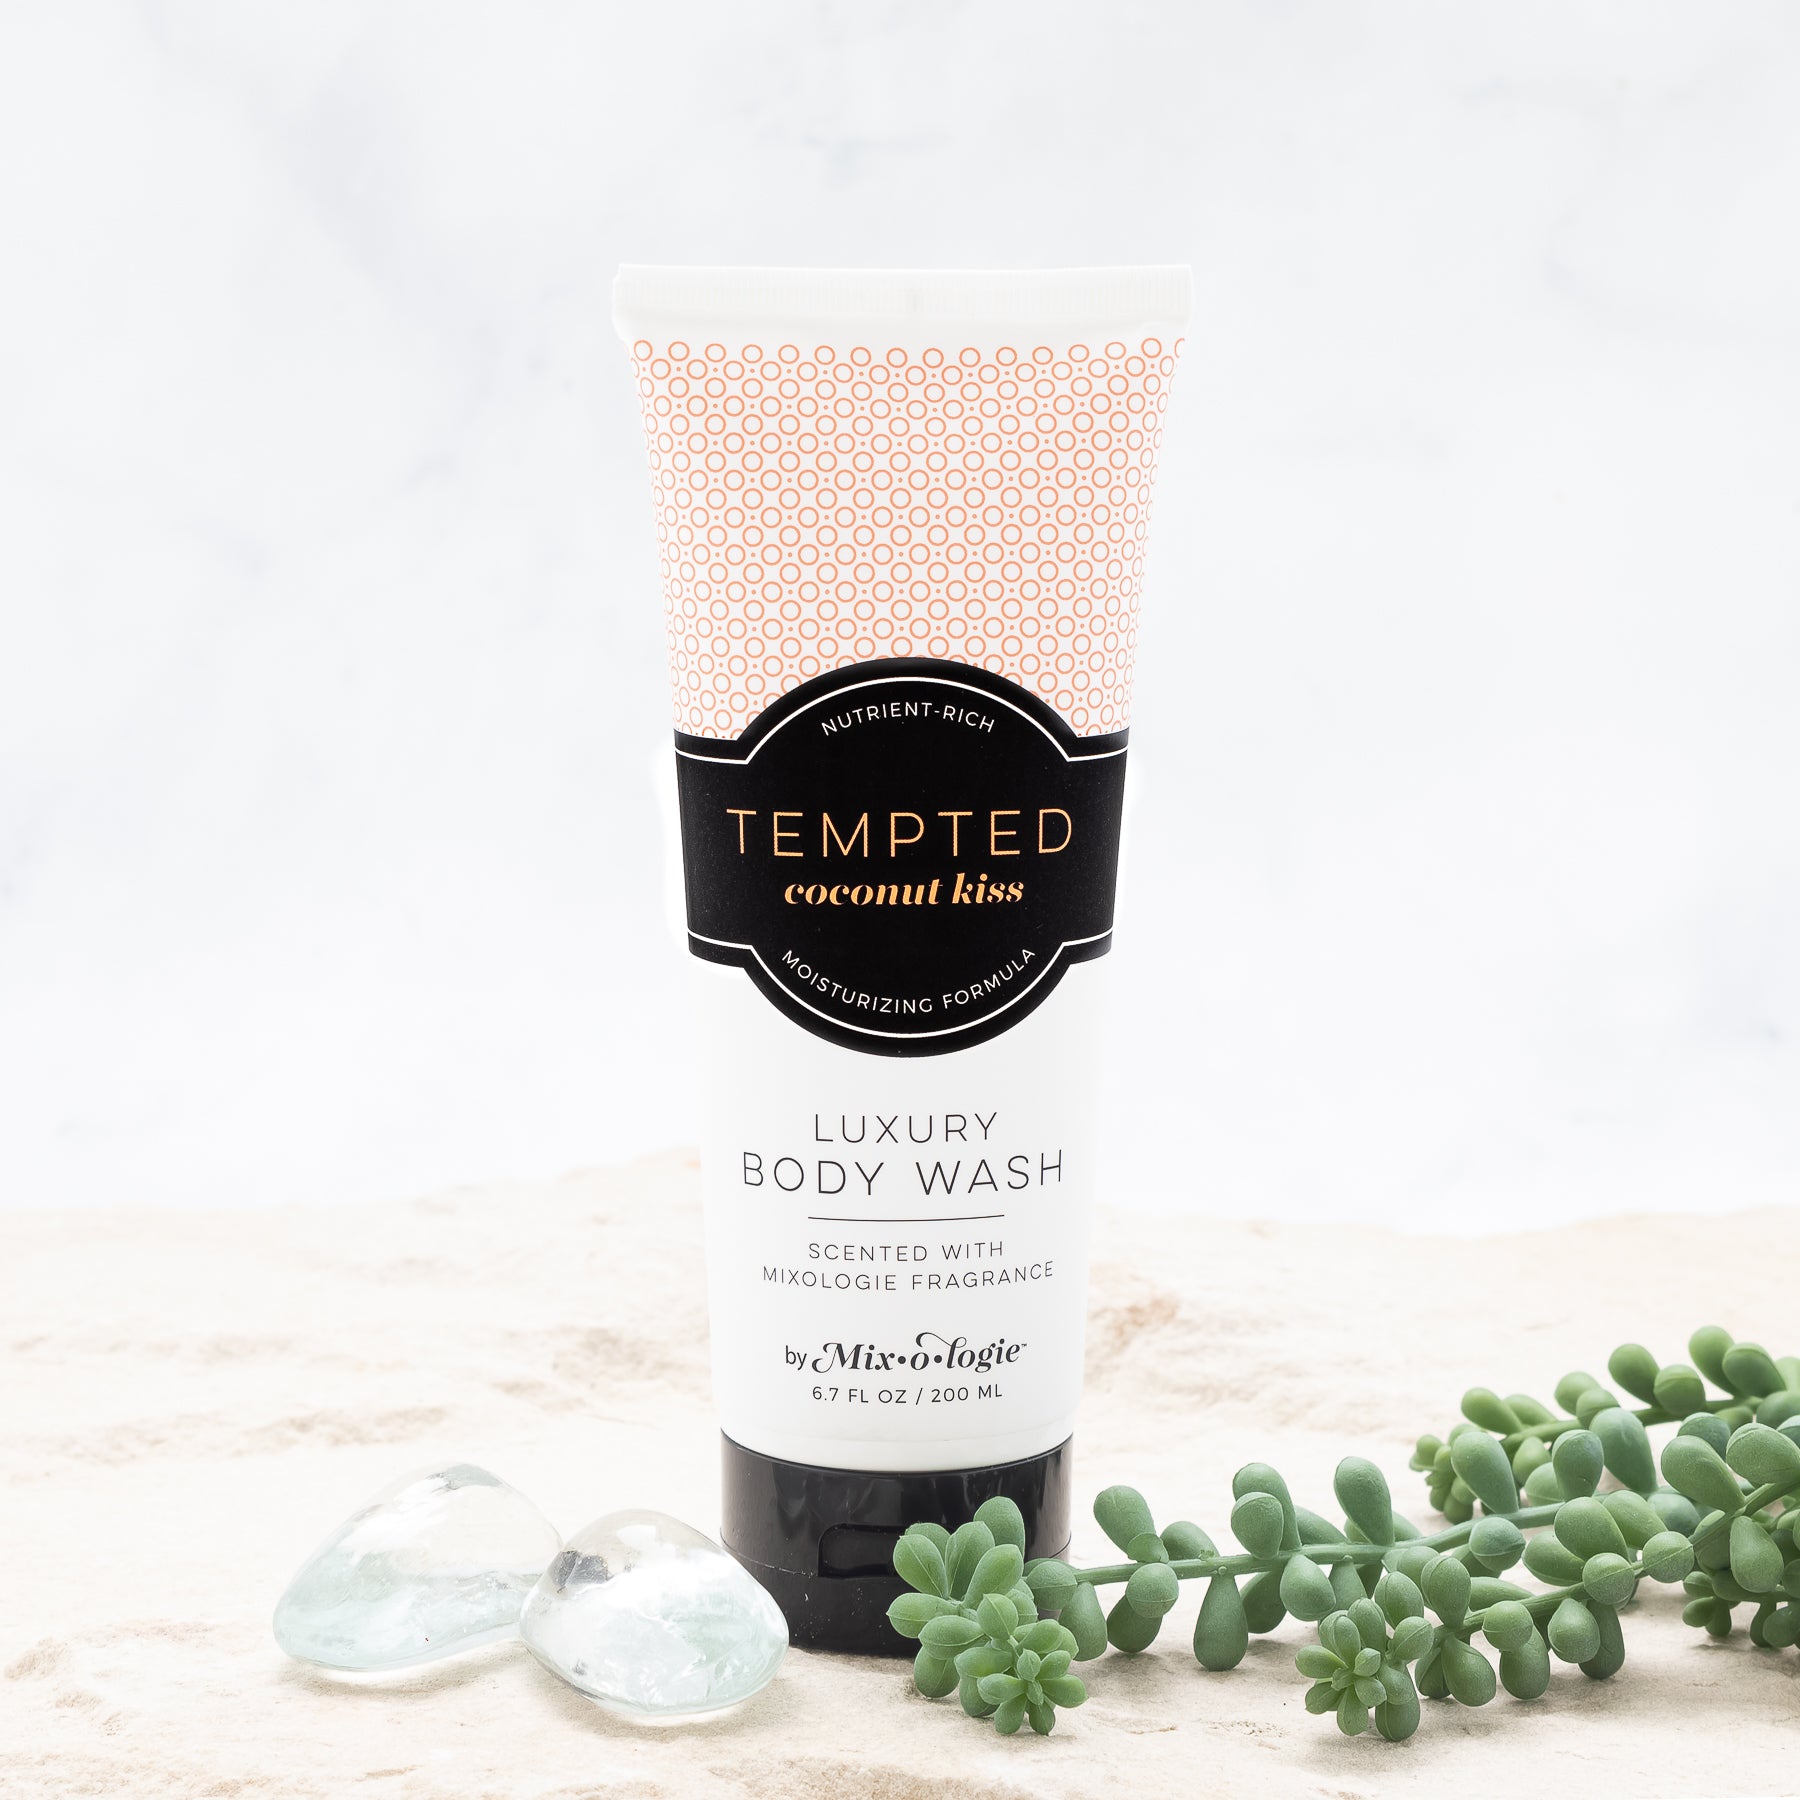 Luxury Body Wash in Mixologie’s Tempted (Coconut Kiss) in peach color sample package with black label. Contains 6.7 fl oz or 200 mL pictured in sand with rocks and greenery.